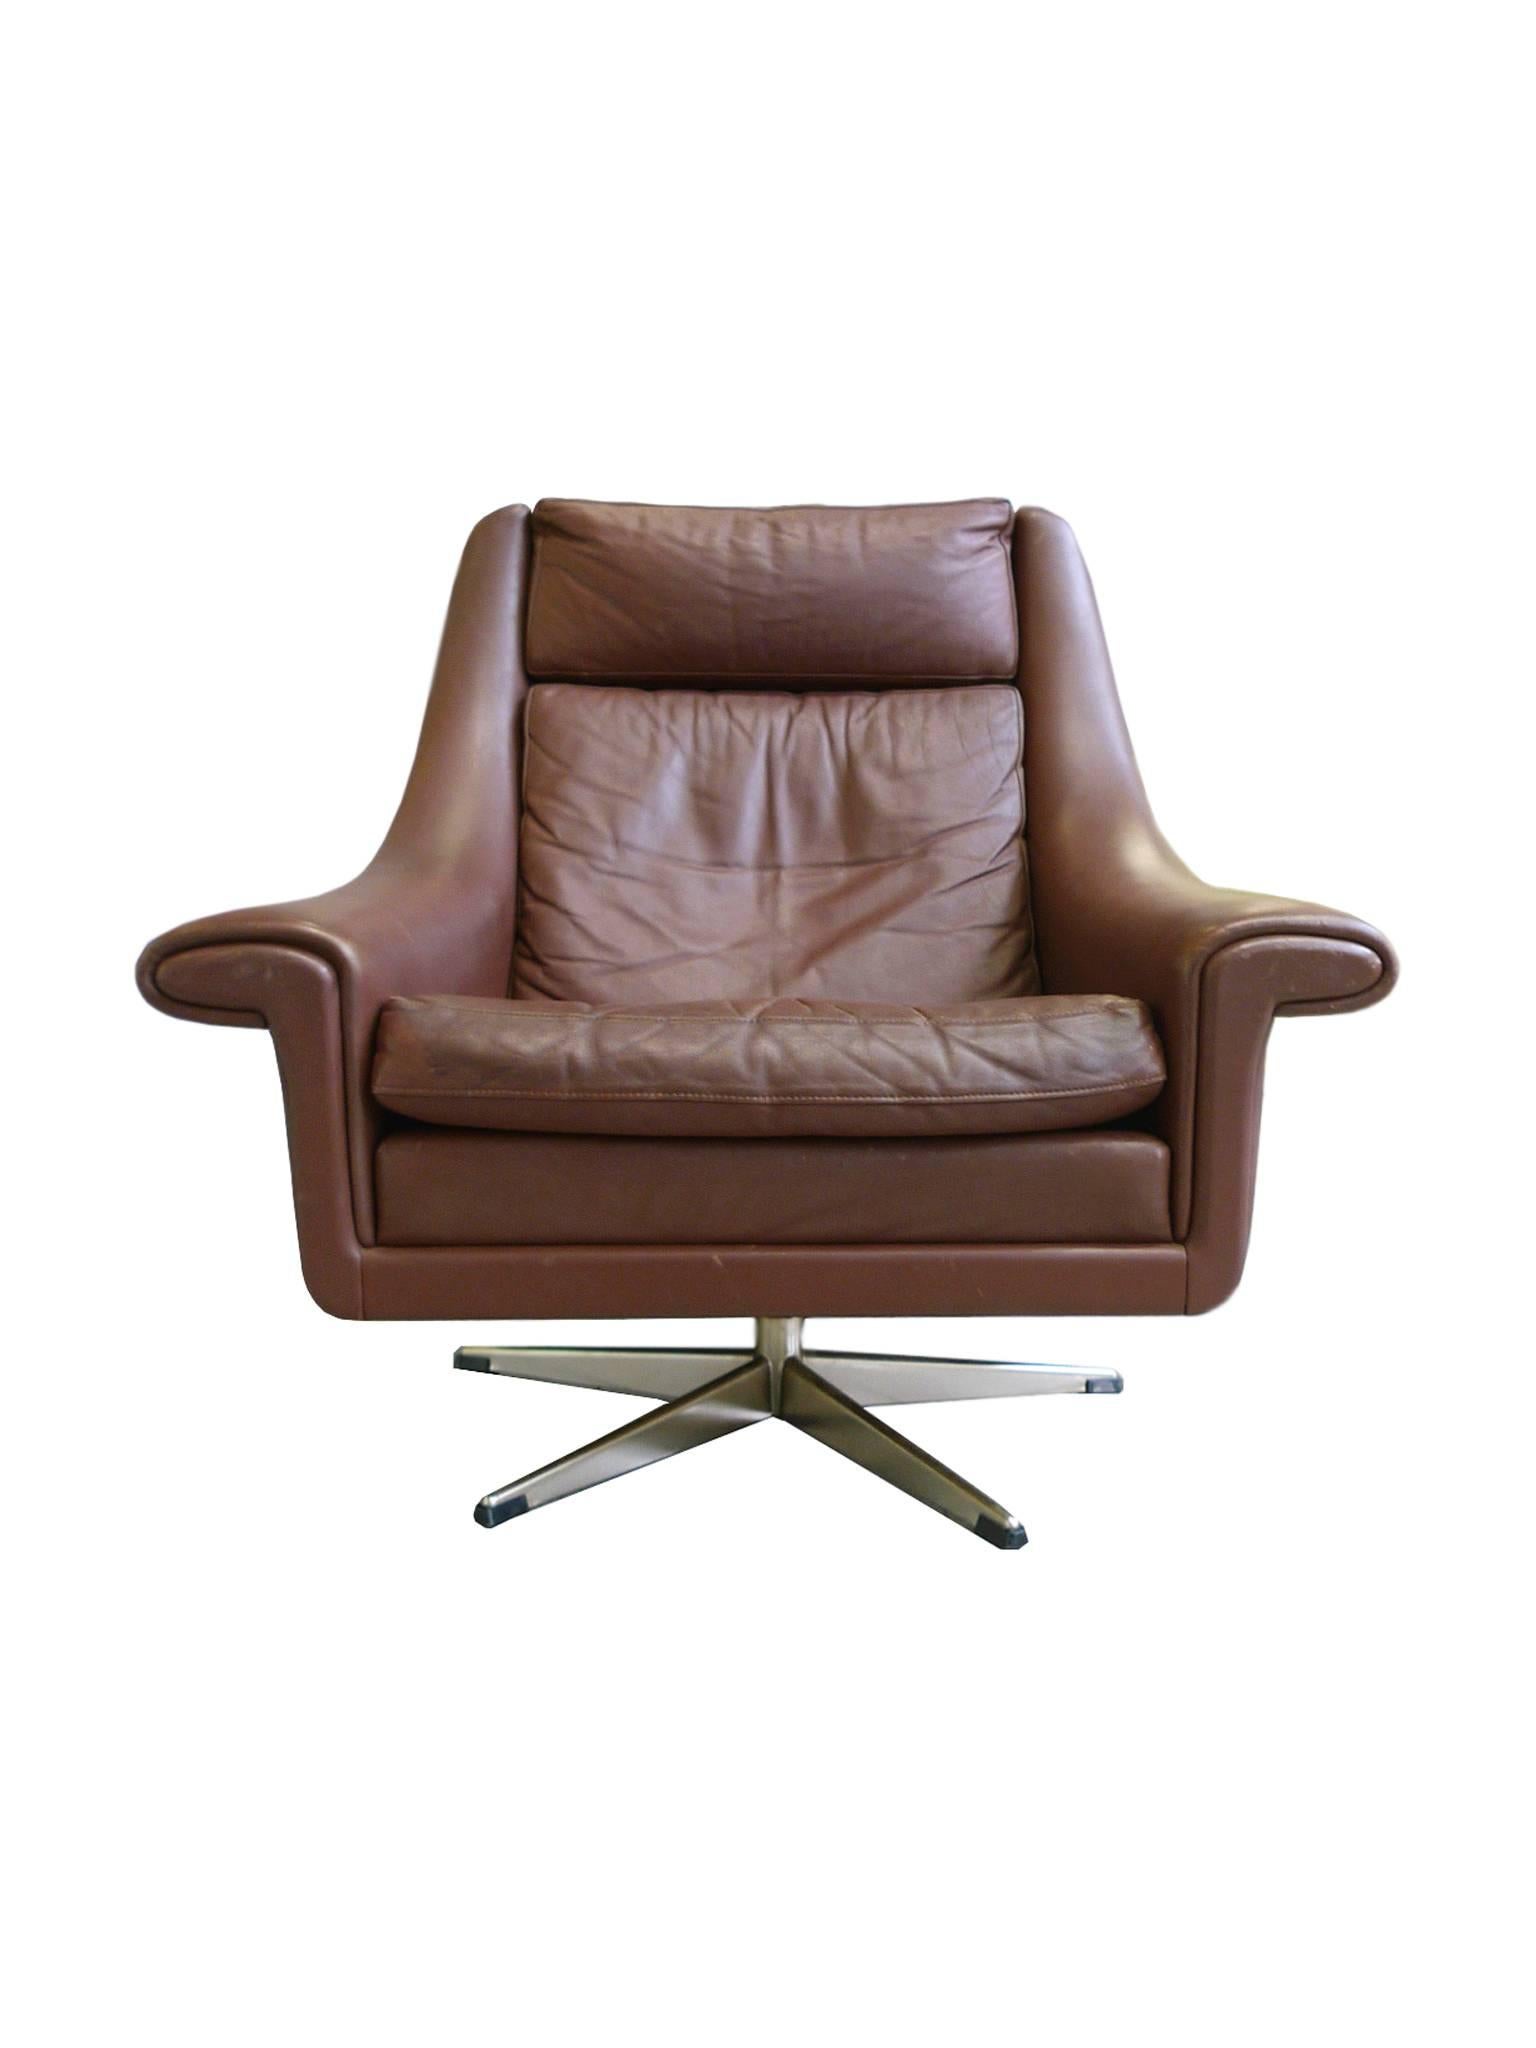 This is the Ambassador chair designed by Aage Christensen in the 1960s and manufactured by Erhardsen & Andersen in Denmark. The chair's design is one of openness and embrace, a perfect lounge chair with a high back and wide seating. The upholstery